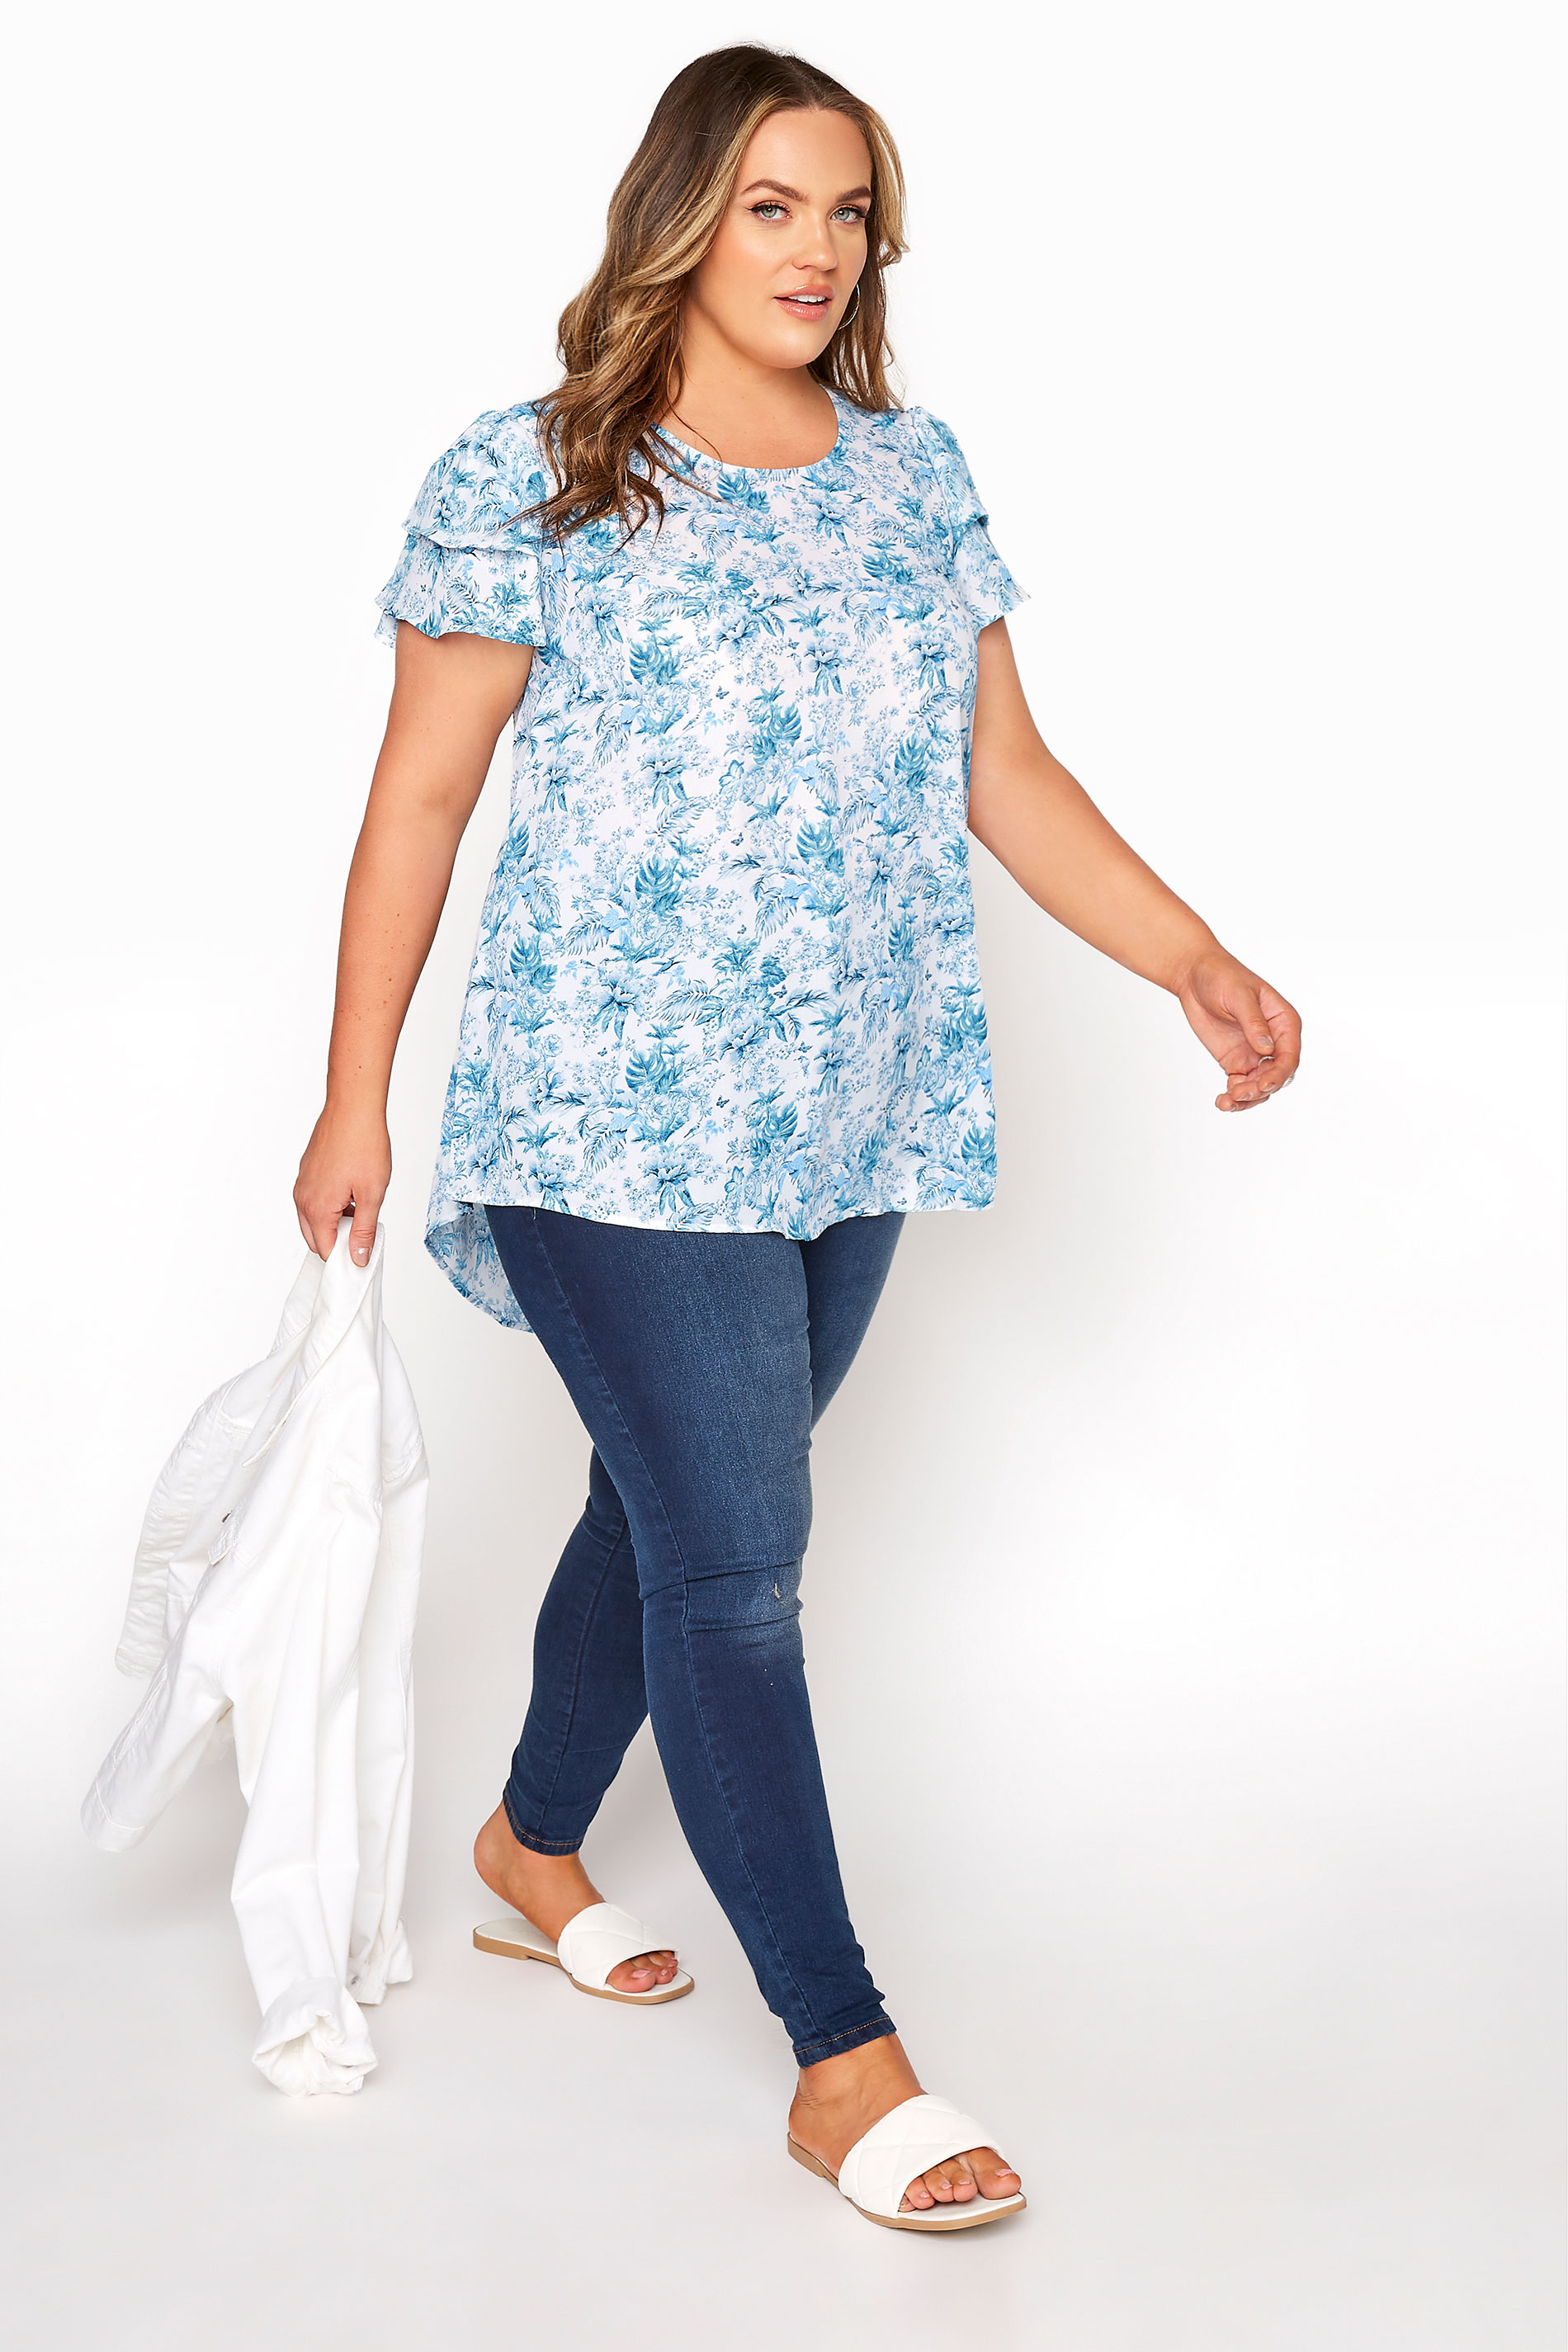 Grande taille  Tops Grande taille  Tops Casual | Blouse Blanche Floral Tropical Ourlet Plongeant - XG93789